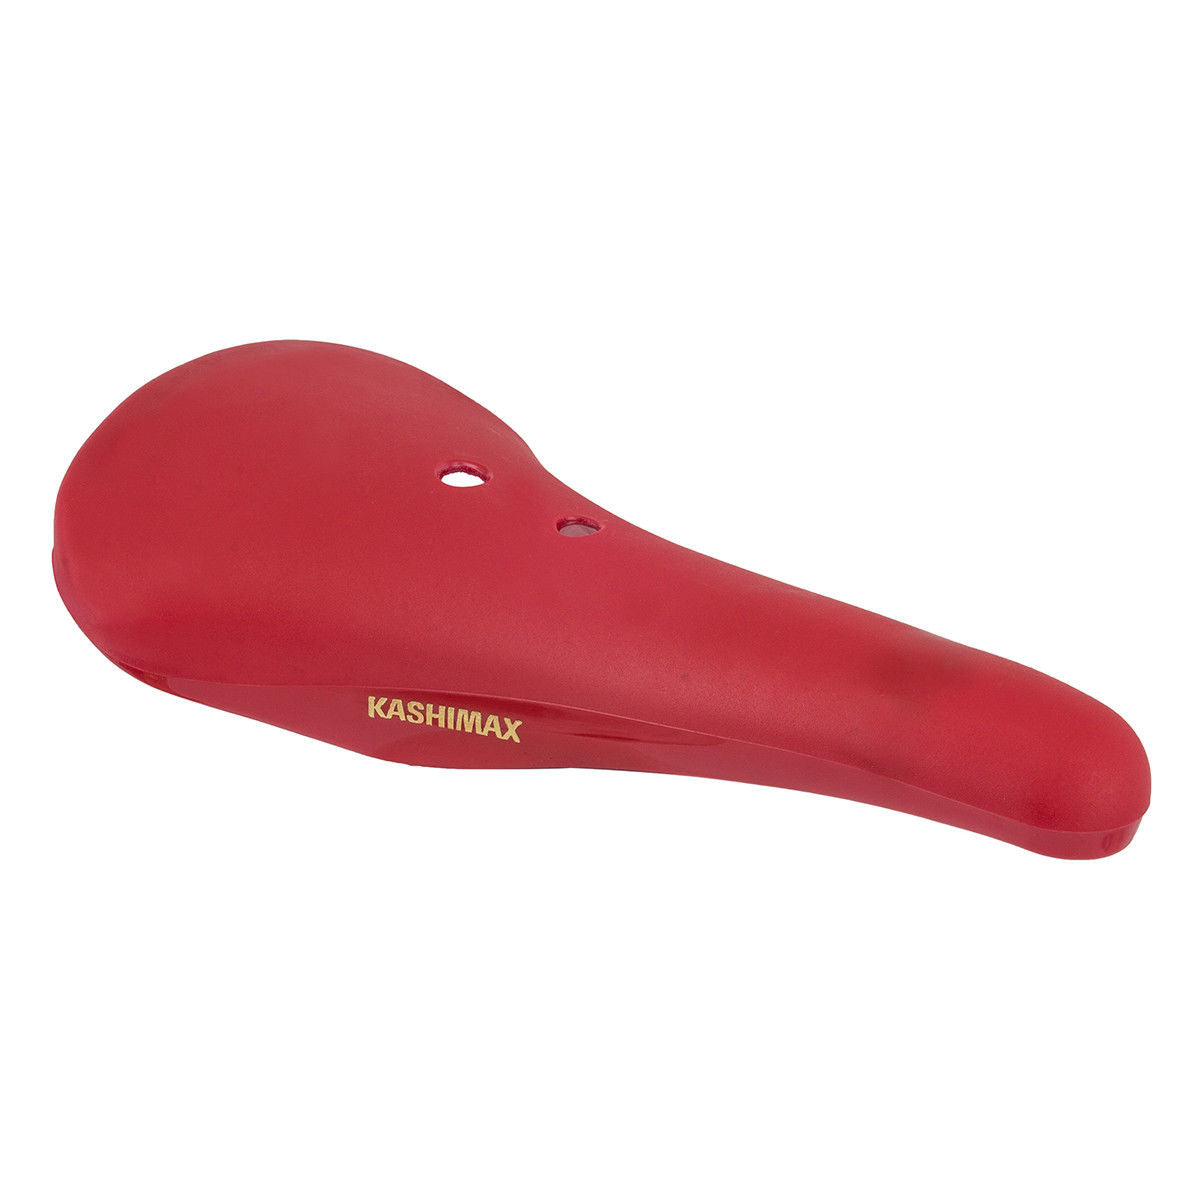 Kashimax RS Railed Saddle / Plastic Seat - Red - Made in Japan